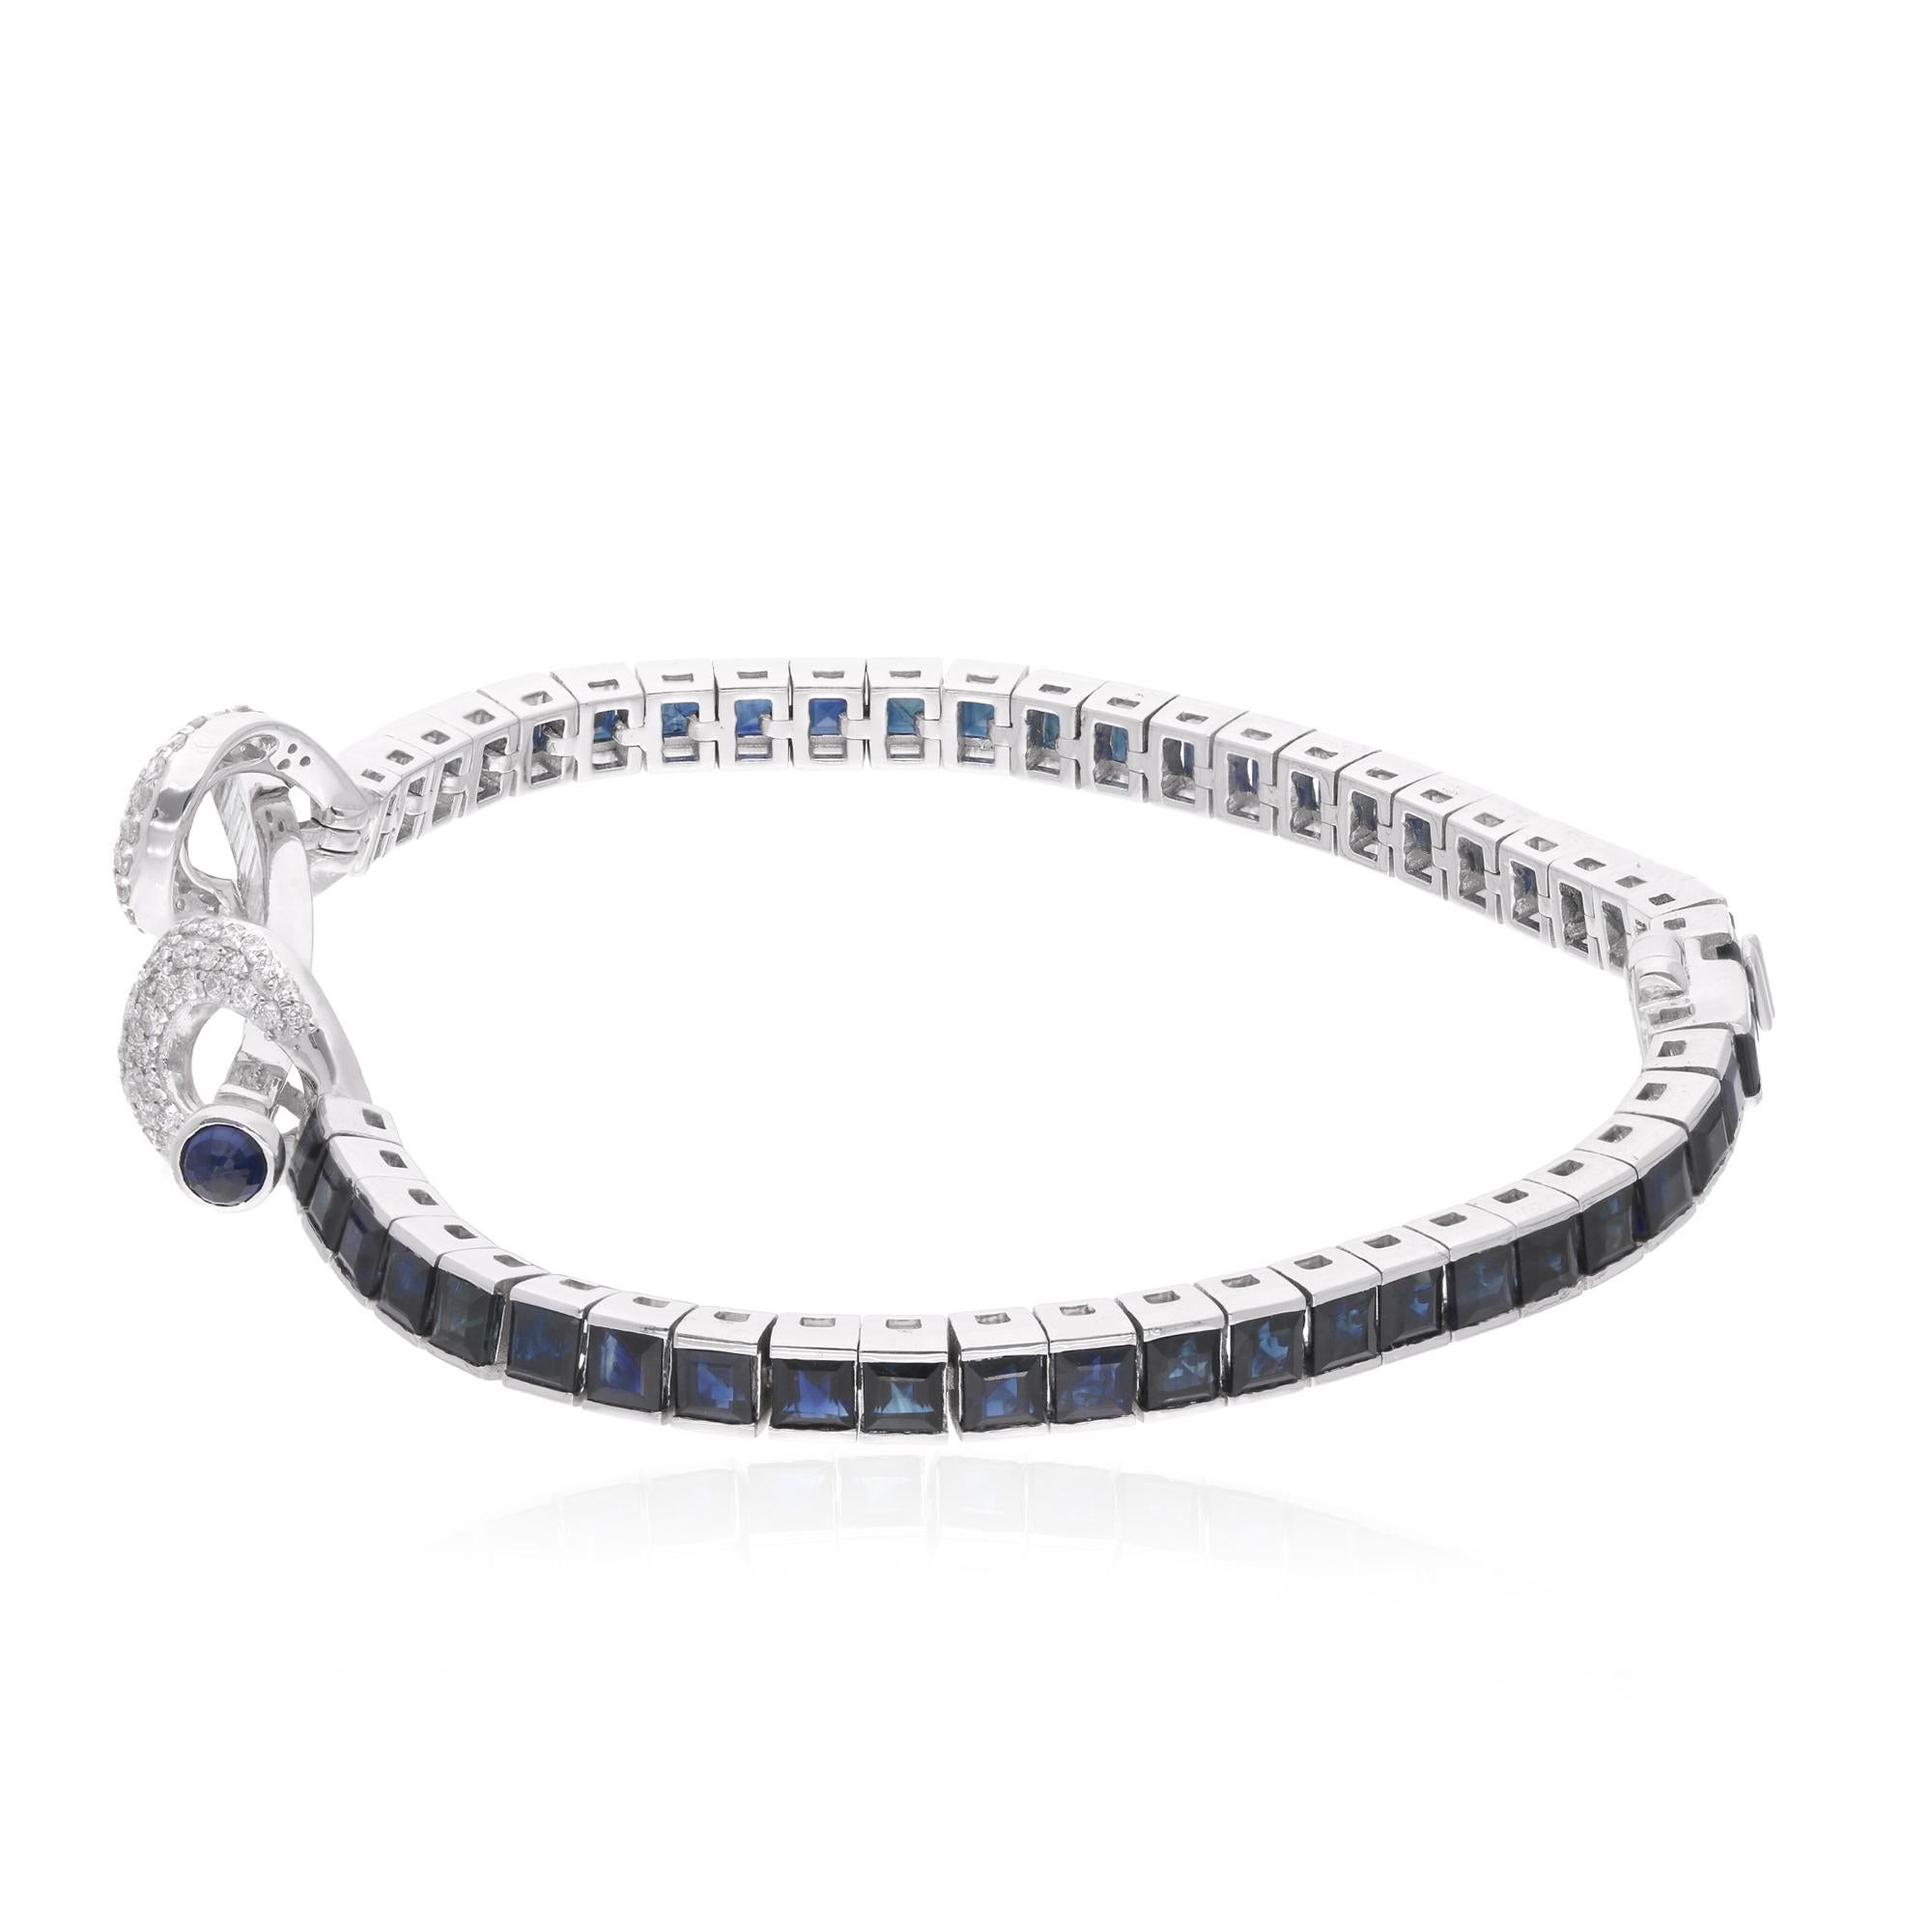 Item Code :- SEBR-42109K
Gross Wt. :- 18.64 gm
18k White Gold Wt. :- 16.86 gm
Natural Diamond Wt. :- 1.00 Ct. ( AVERAGE DIAMOND CLARITY SI1-SI2 & COLOUR H-I )
Bracelet Length :- 7 Inches Long

✦ Sizing
.....................
We can adjust most items